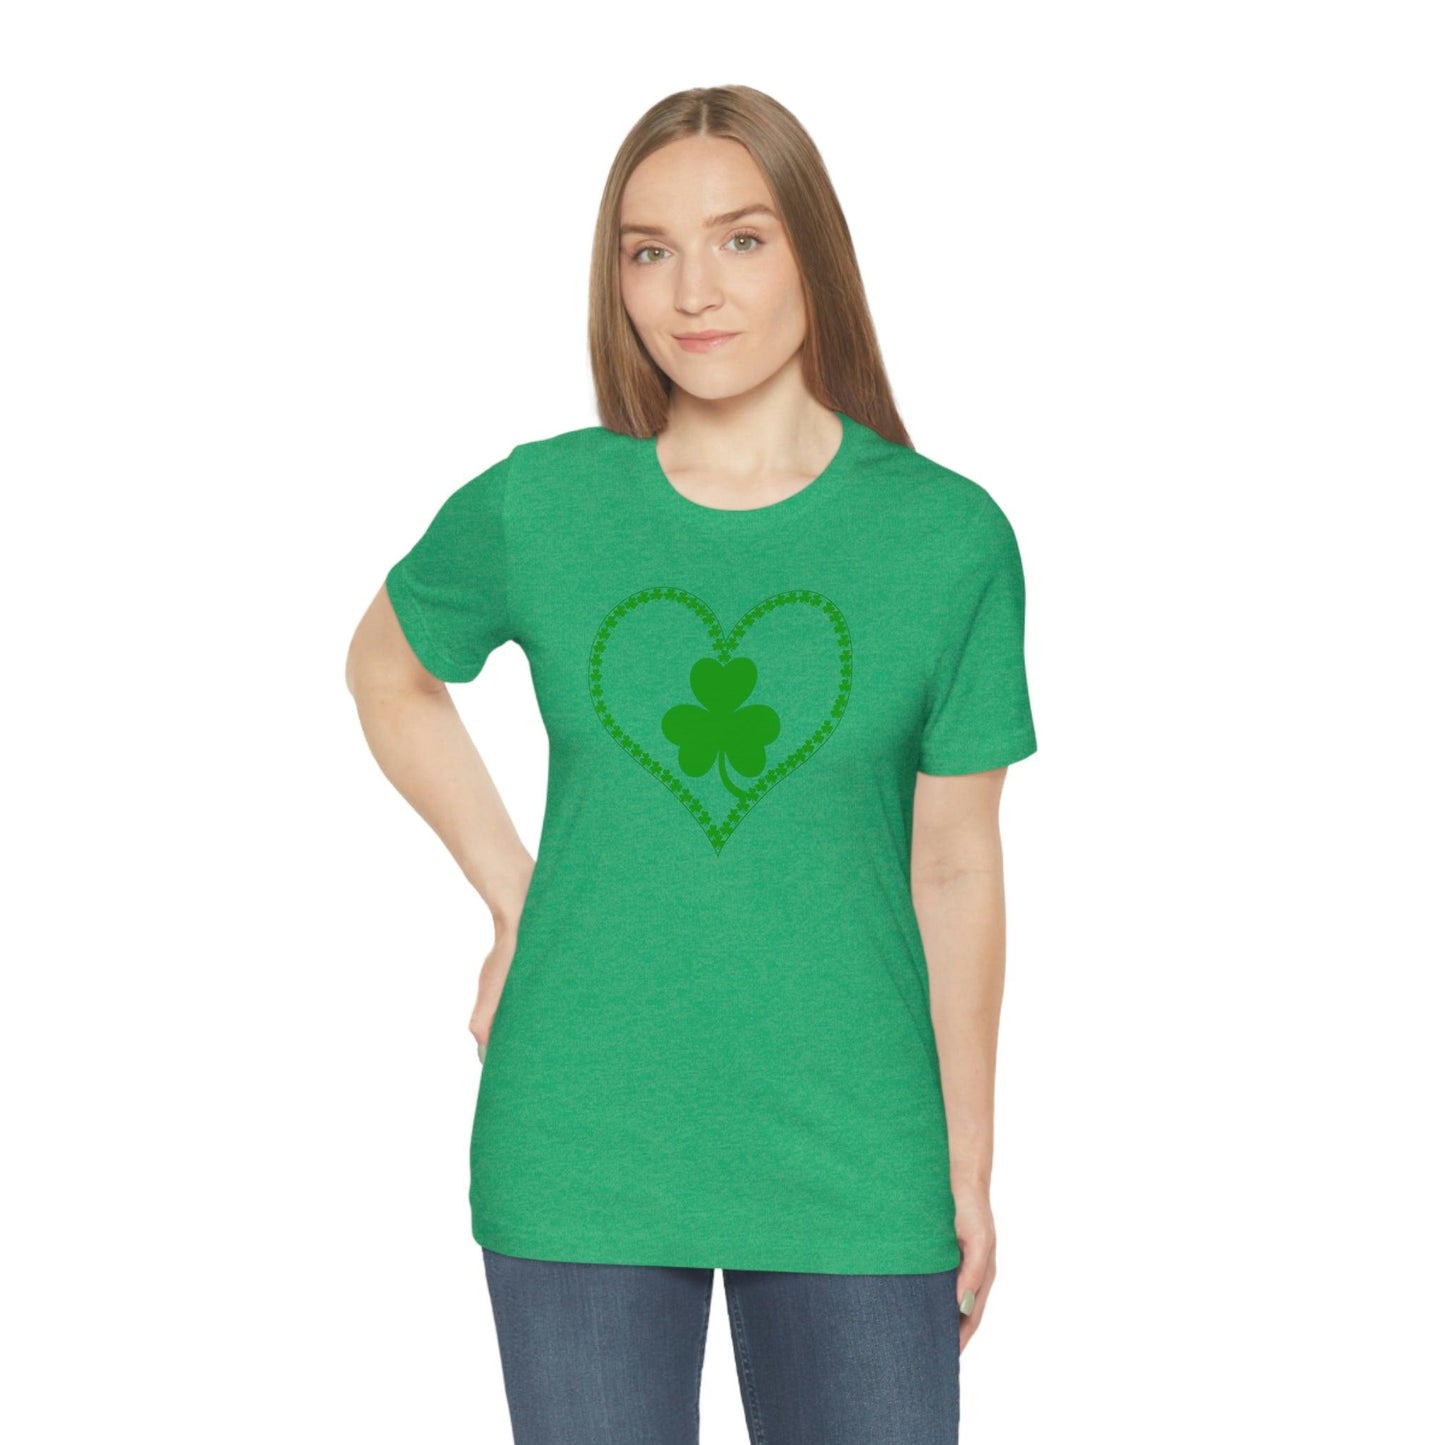 St Patrick's Day shirt Feeling Lucky Shirt One Lucky Teacher Shirt St Patrick's Day shirt - Funny St Paddy's day Funny Shirt Shamrock shirt